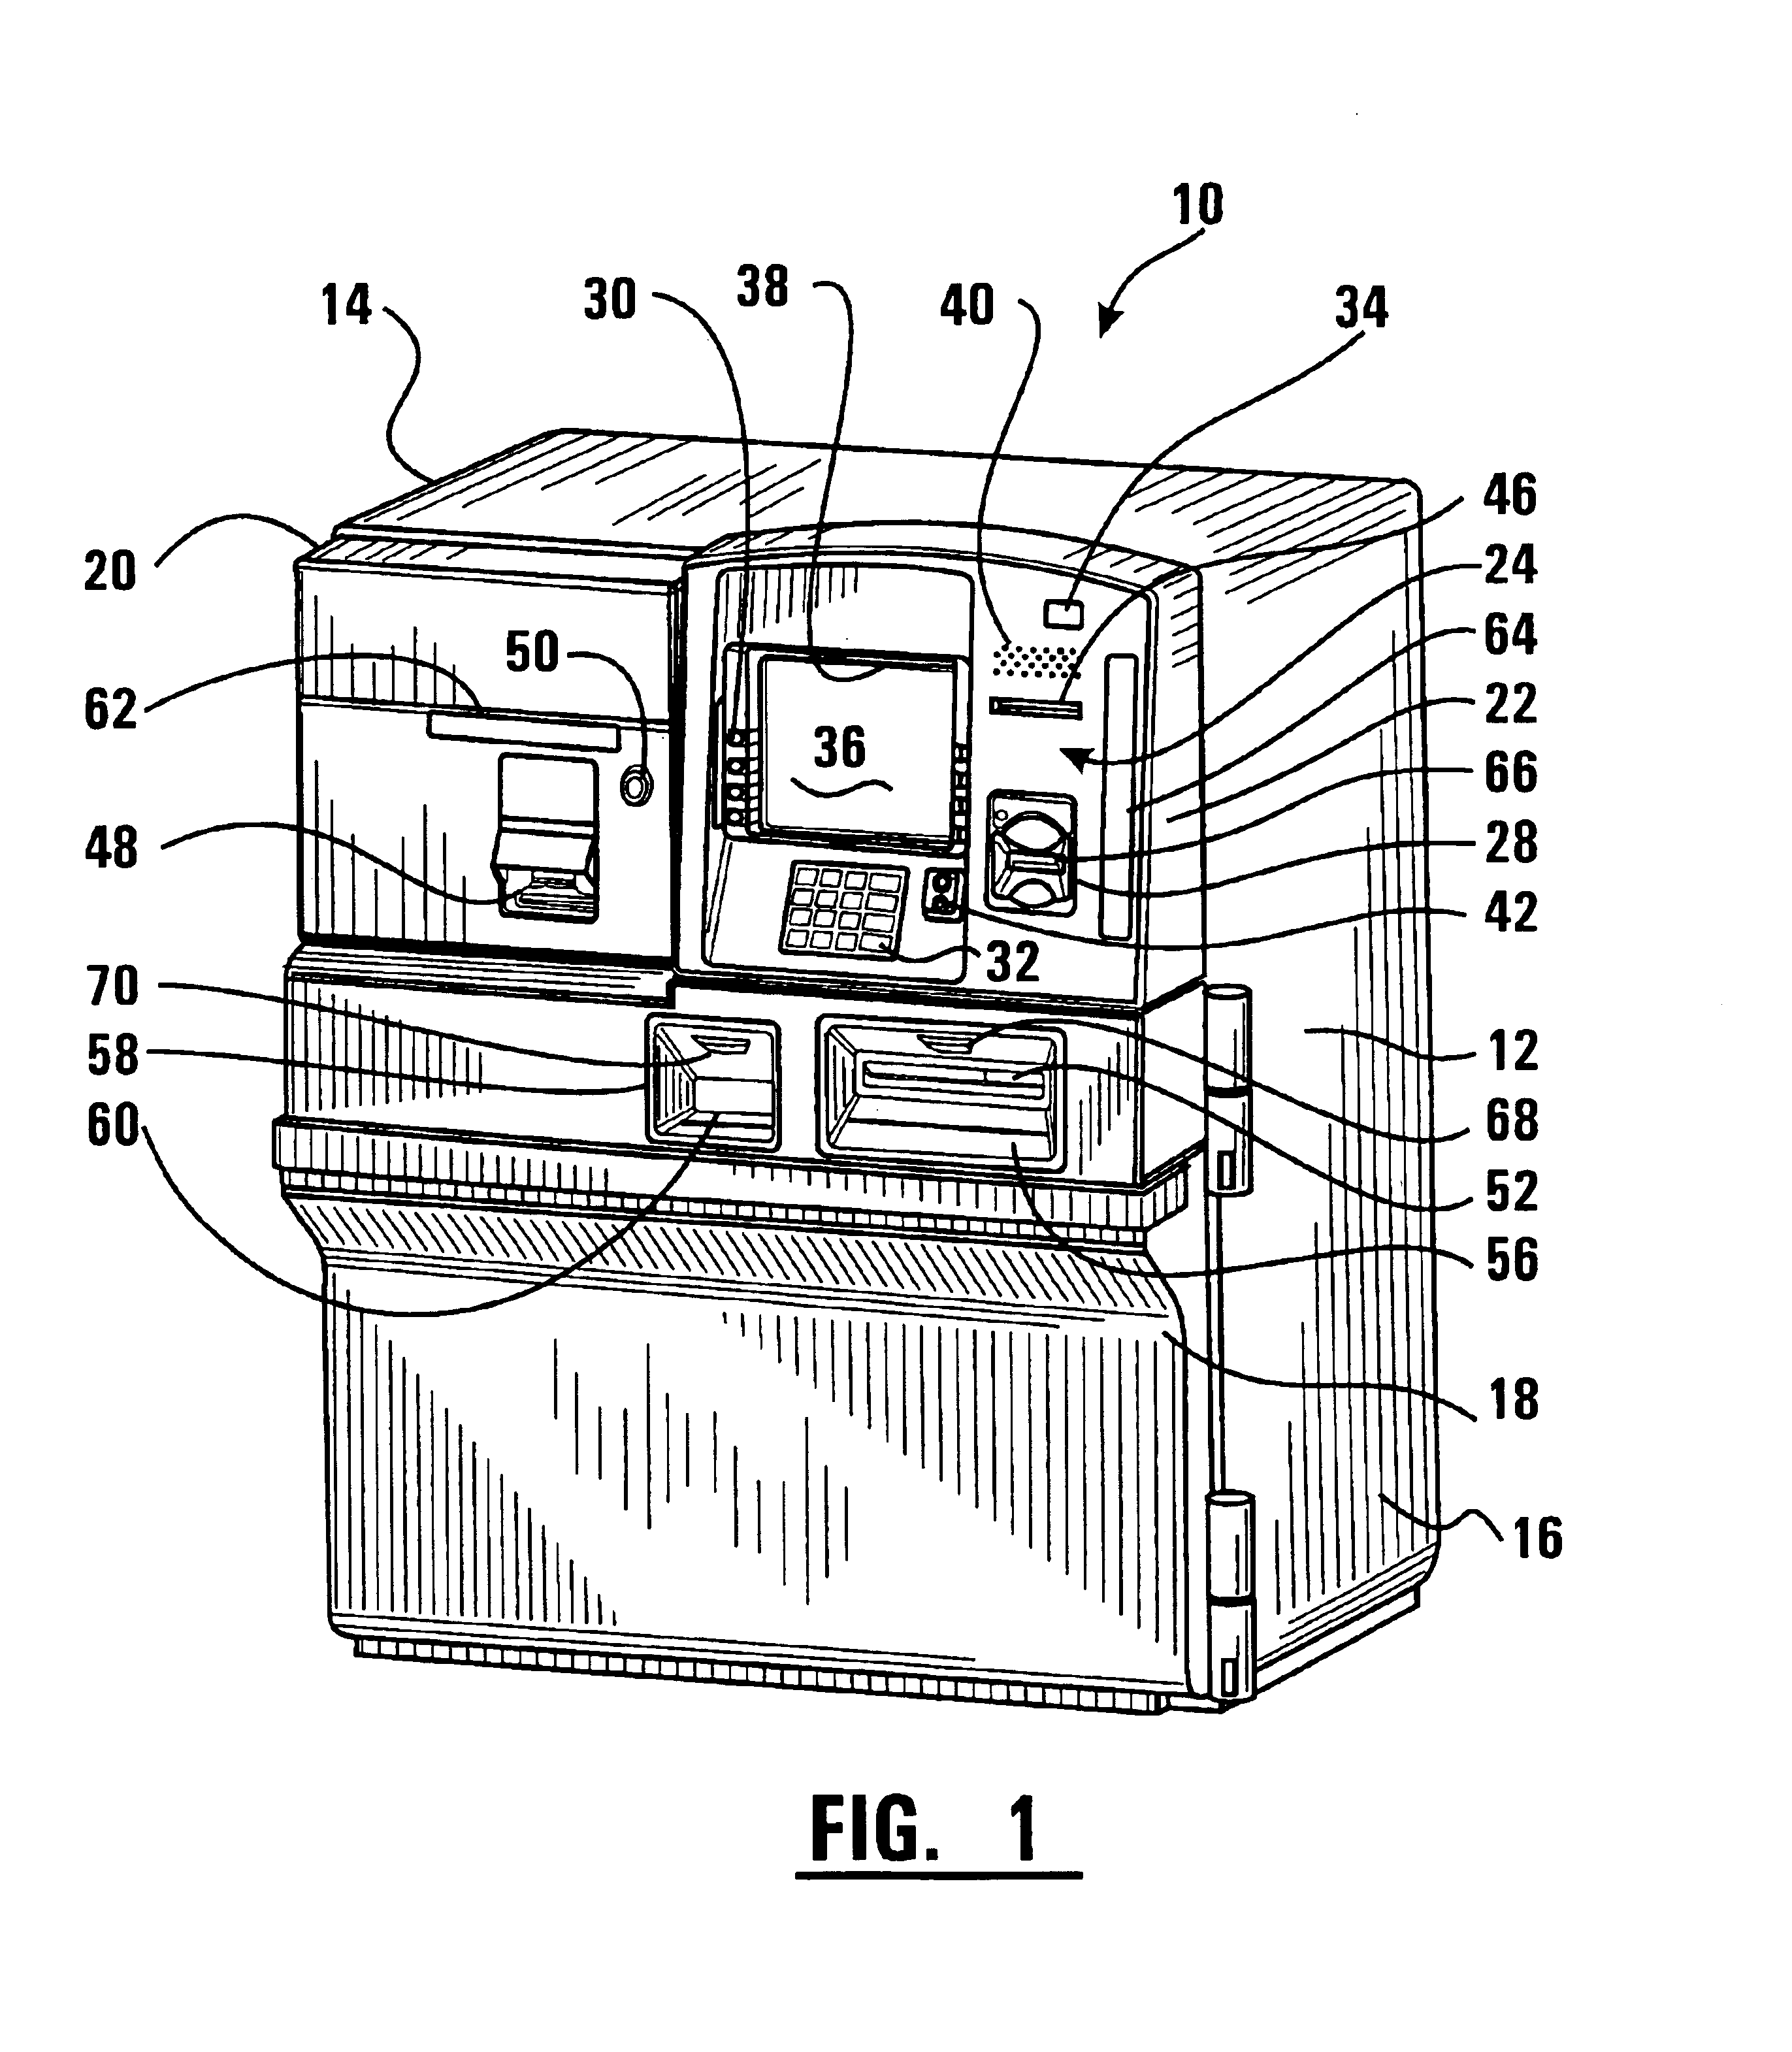 Cash dispensing automated banking machine diagnostic device